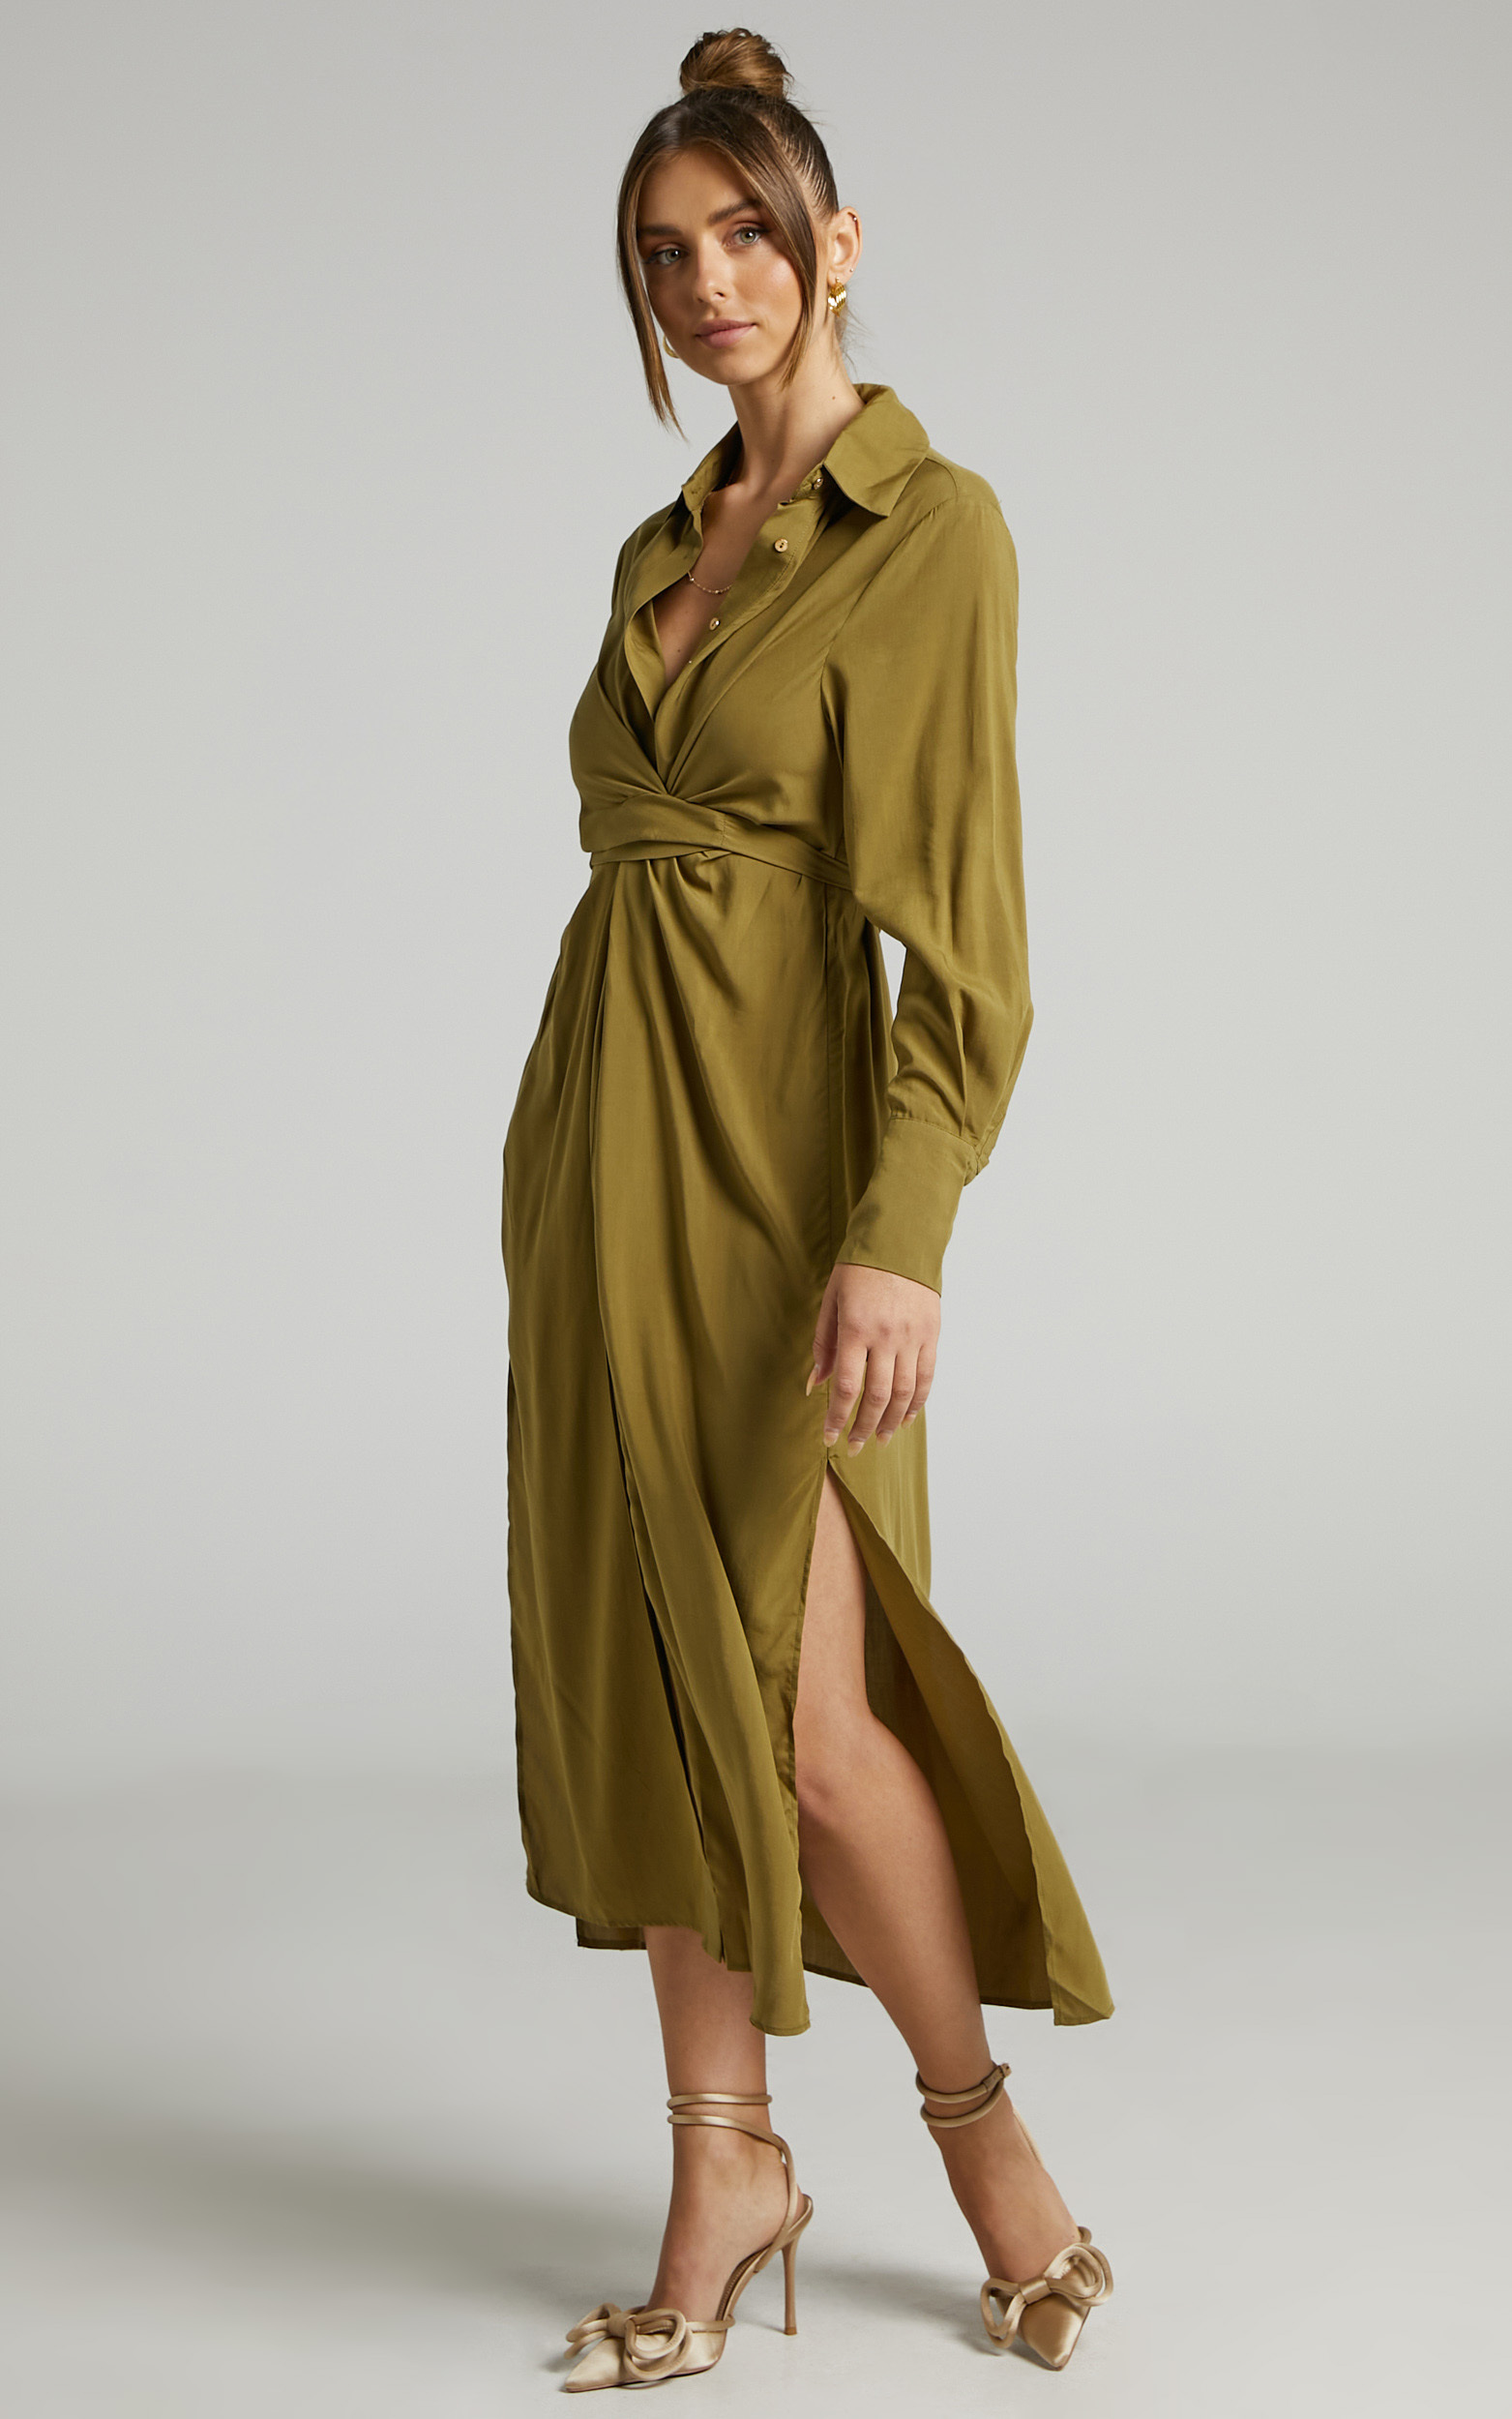 Trinidad Twist Front Button Through Maxi Dress in Khaki - 04, GRN1, hi-res image number null